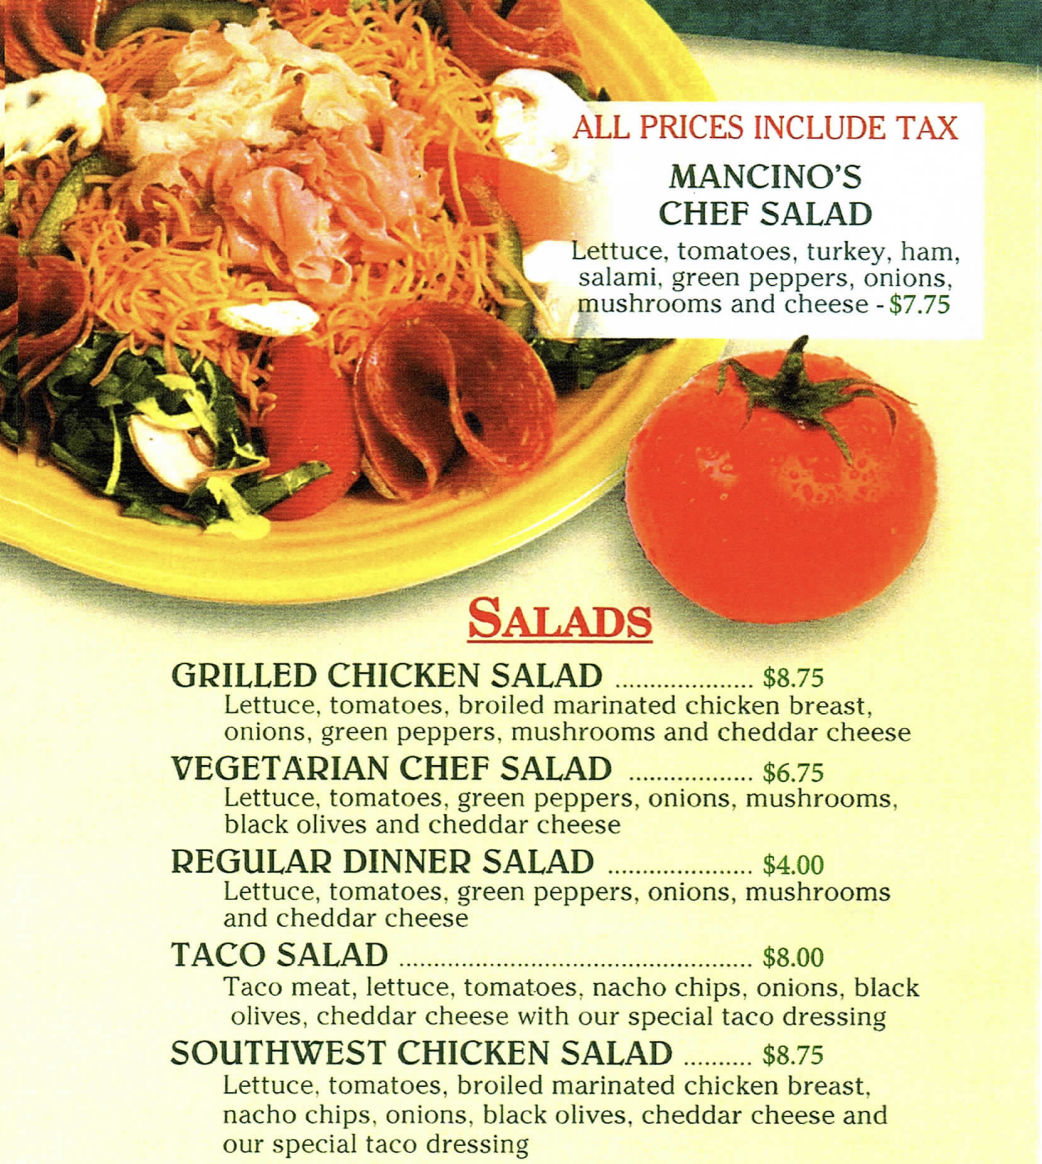 ALL PRICES INCLUDE TAX MANCINO'S CHEF SALAD Lettuce, tomatoes, turkey, ham, salami, green peppers, onions, mushrooms and cheese $7.75  SALADS GRILLED CHICKEN SALAD $8.75 Lettuce, tomatoes, broiled marinated chicken breast, onions, green peppers, mushrooms and cheddar cheese VEGETARIAN CHEF SALAD $6.75 Lettuce, tomatoes, green peppers, onions, mushrooms, black olives and cheddar cheese REGULAR DINNER SALAD $4.00 Lettuce, tomatoes, green peppers, onions, mushrooms and cheddar cheese TACO SALAD $8.00 Taco meat, lettuce, tomatoes, nacho chips, onions, black olives, cheddar cheese with our special taco dressing SOUTHWEST CHICKEN SALAD $8.75 Lettuce, tomatoes, broiled marinated chicken breast. nacho chips, onions, black olives, cheddar cheese and our special taco dressing